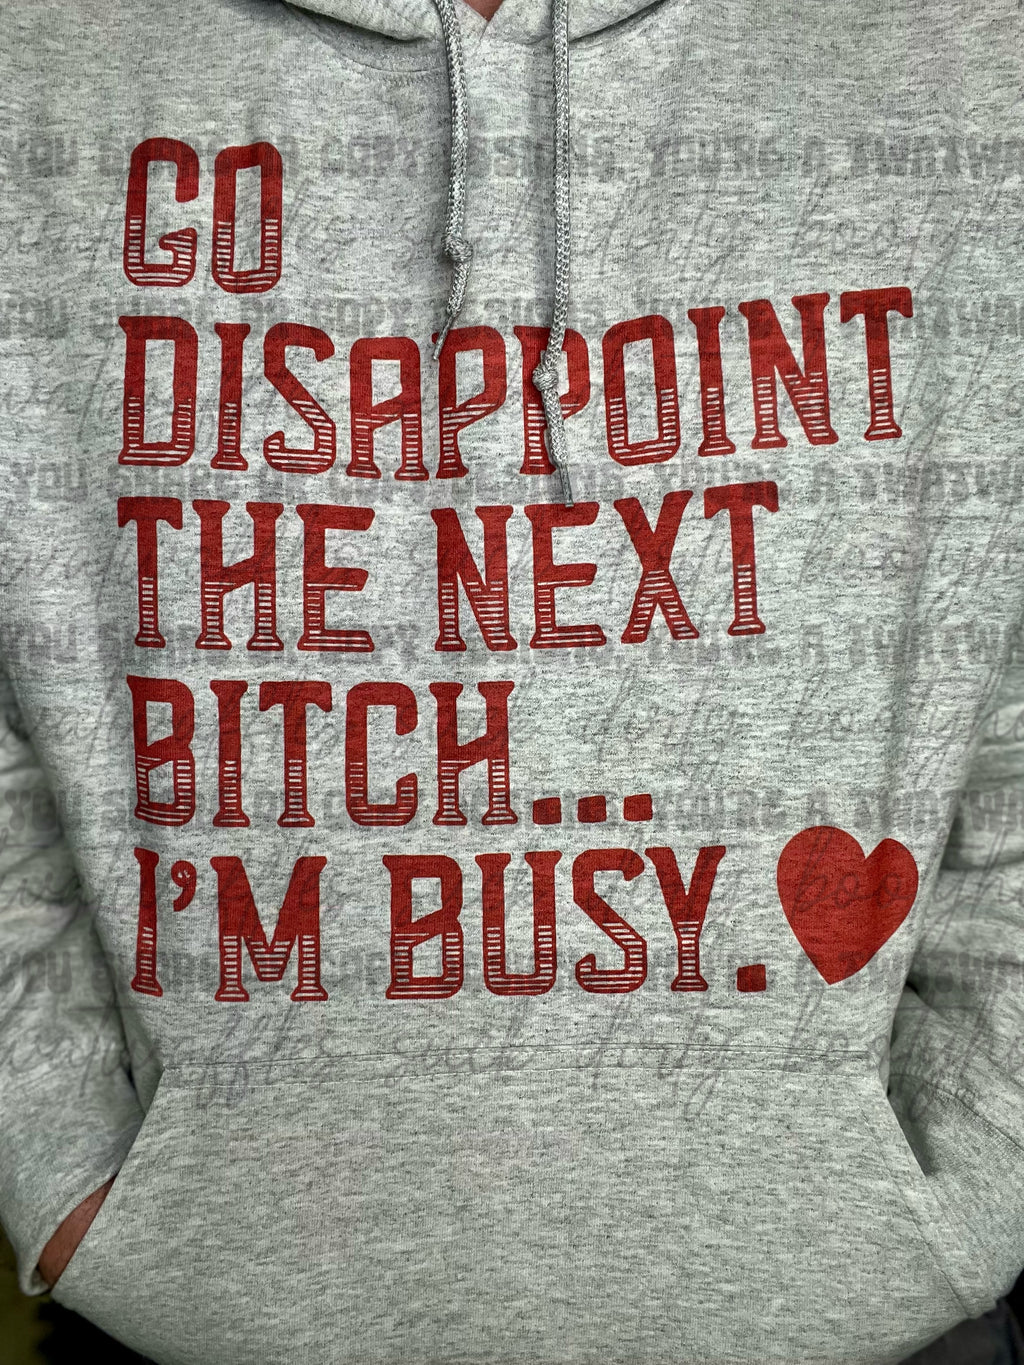 Go Disappoint The Next Bitch... I'm Busy Top Design